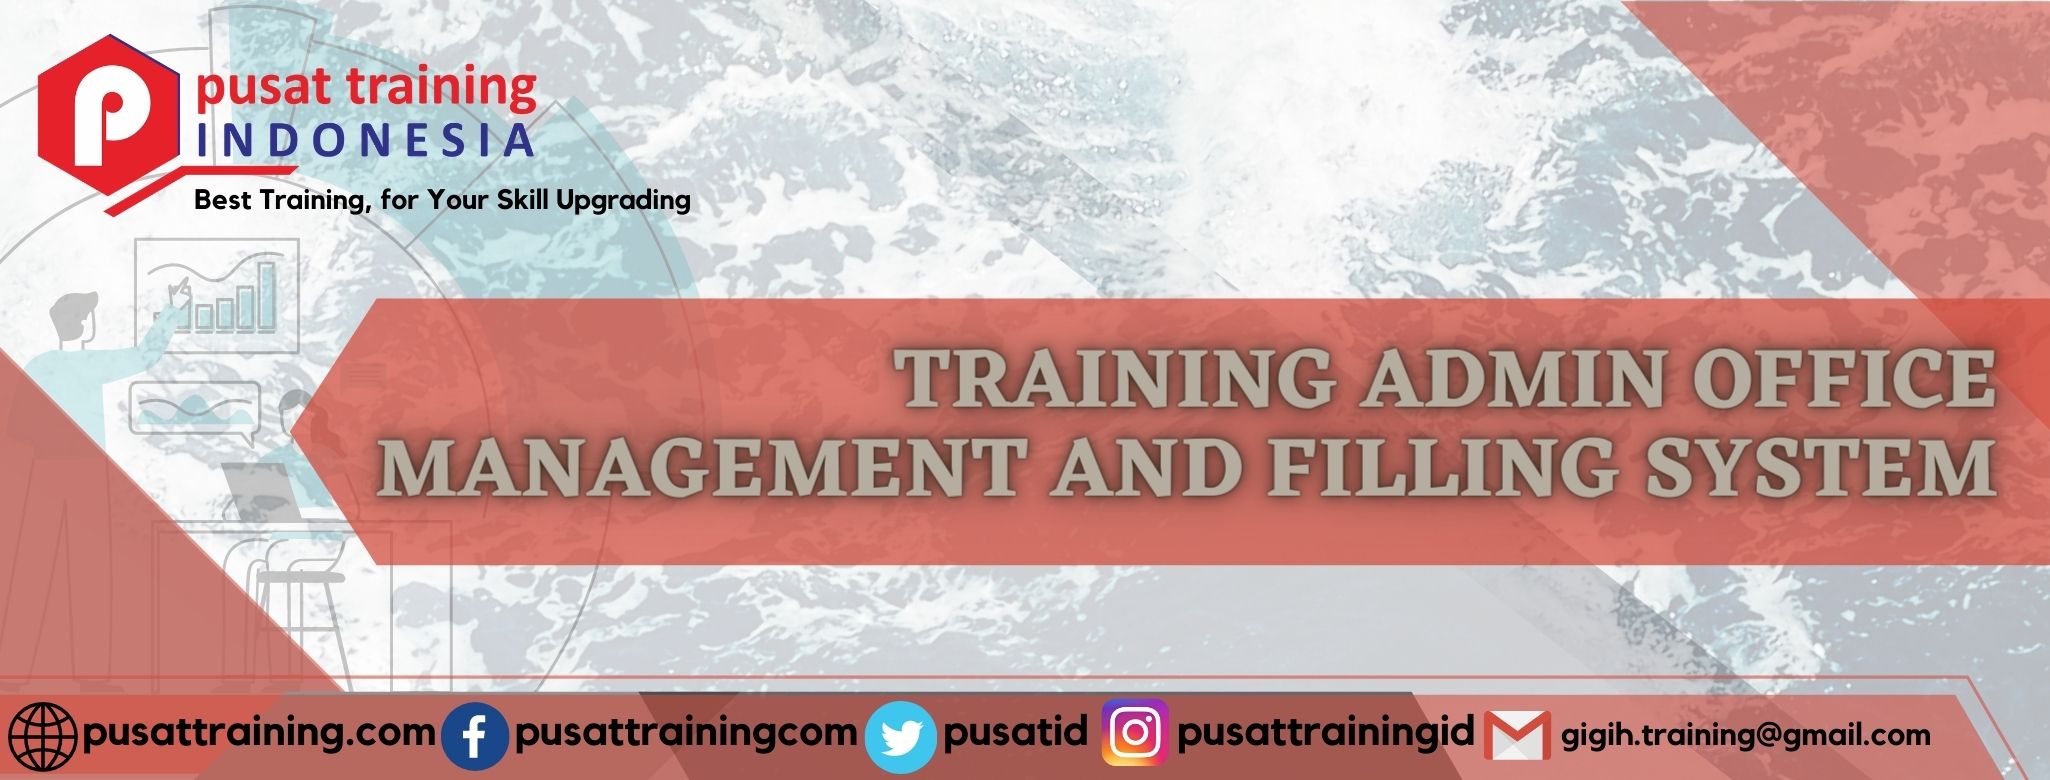 TRAINING ADMIN OFFICE MANAGEMENT AND FILLING SYSTEM